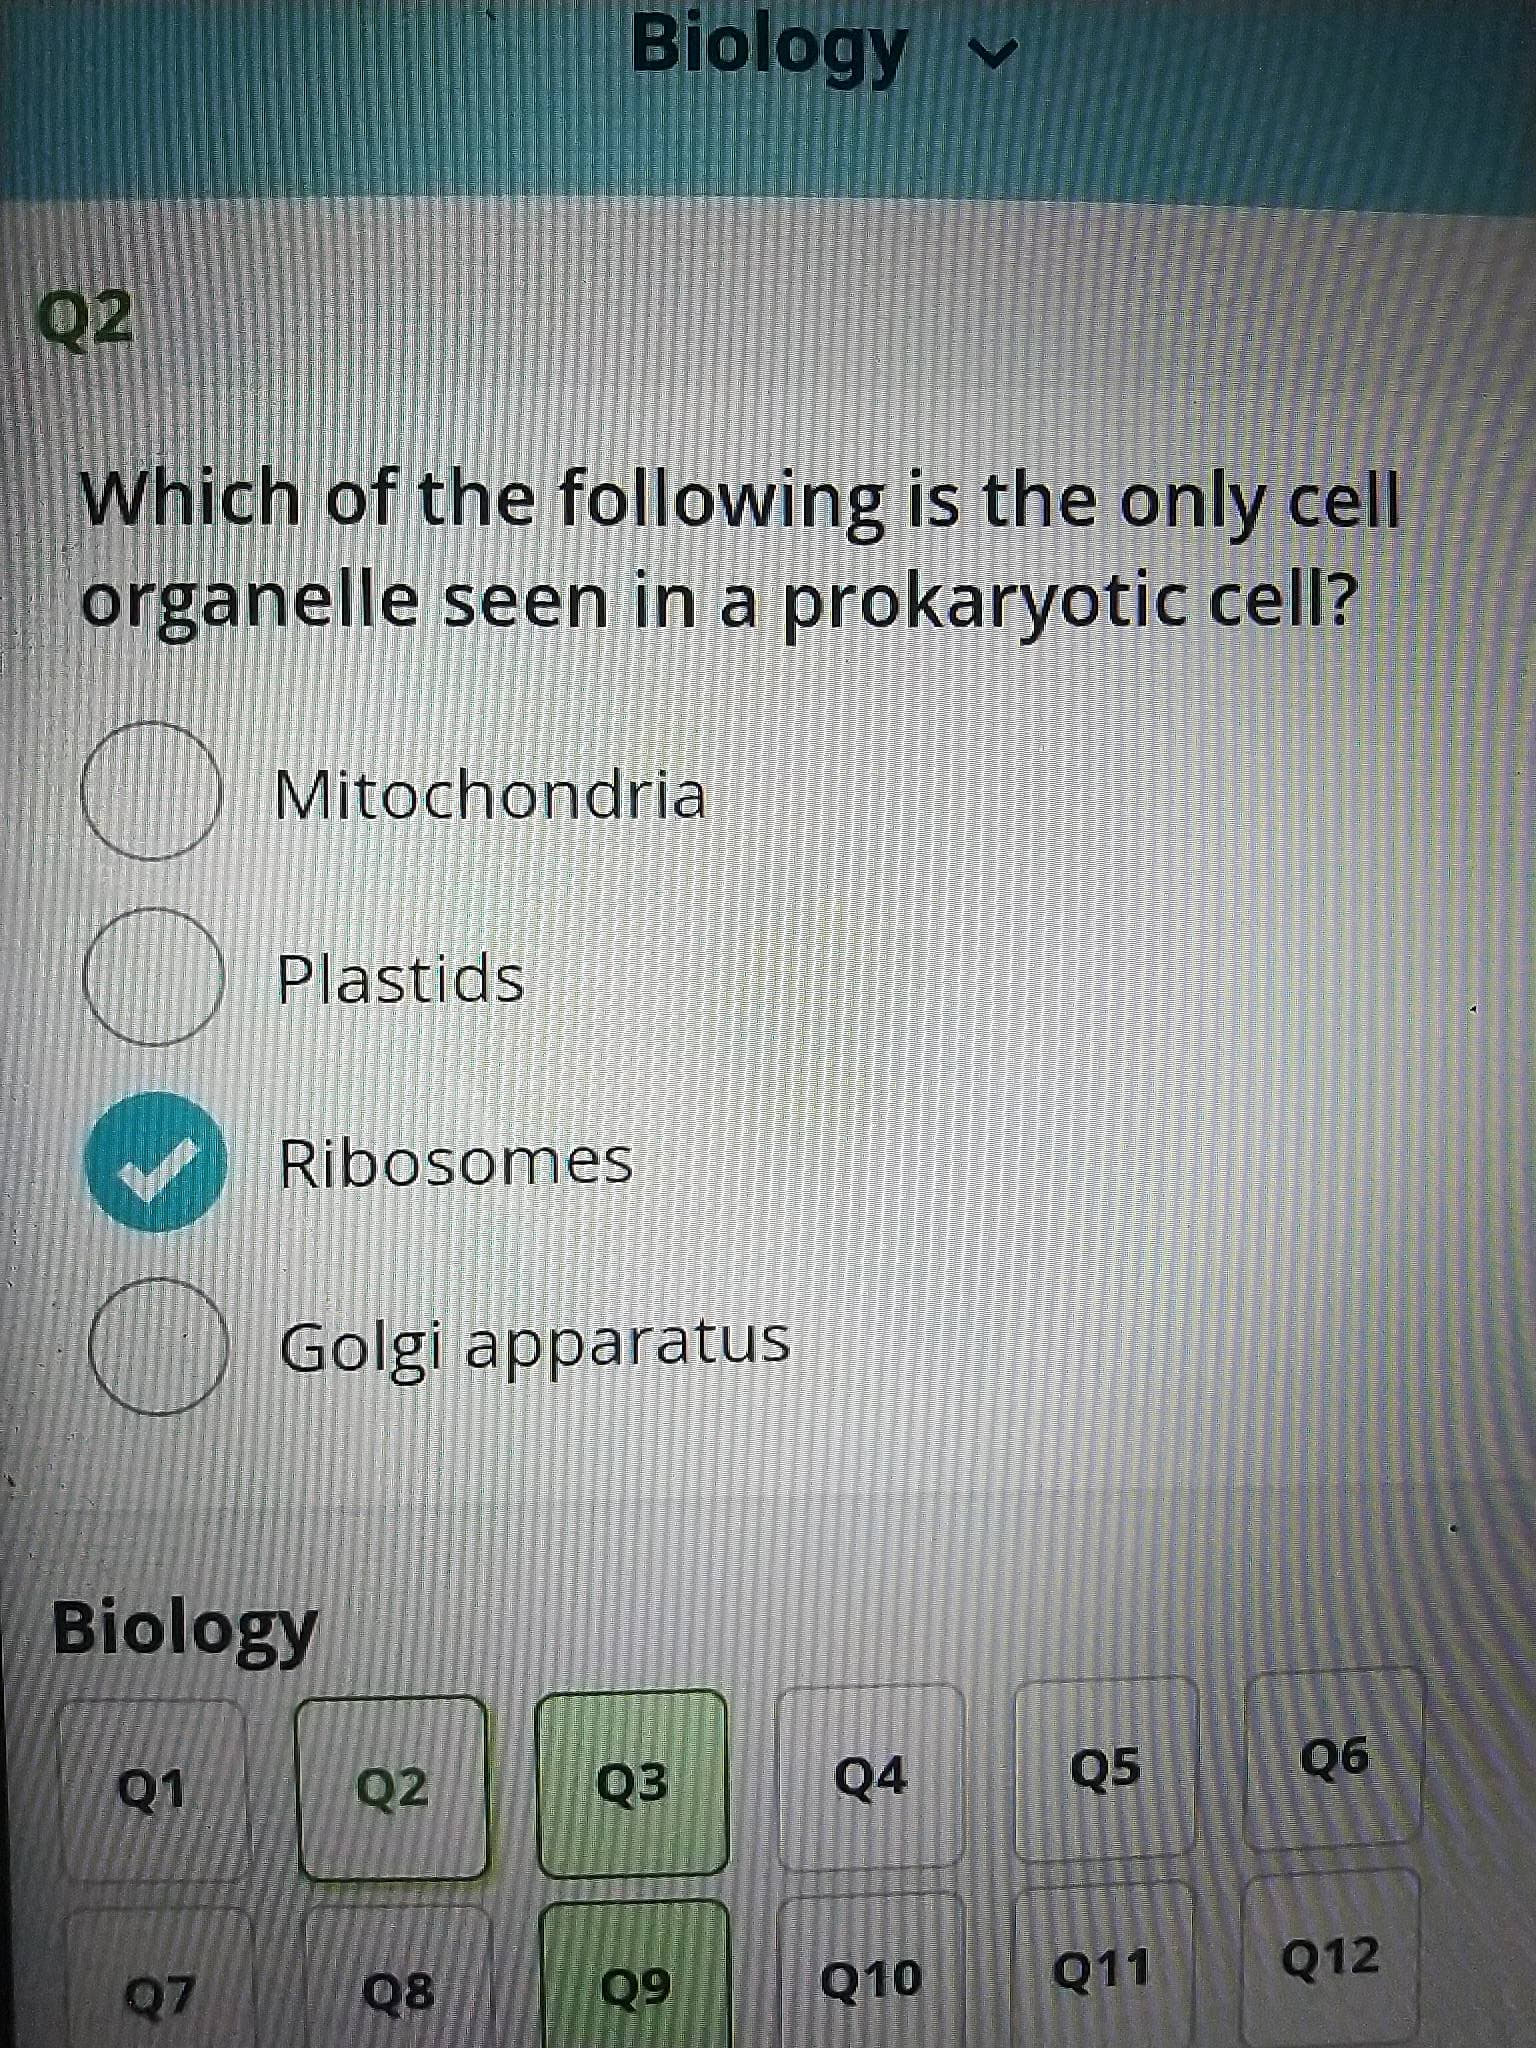 Biology v
Q2
Which of the following is the only cell
organelle seen in a prokaryotic cell?
Mitochondria
Plastids
Ribosomes
Golgi apparatus
Biology
Q2
Q3
Q4
Q5
90
Q7
08
Q10
60
Q11
Q12
